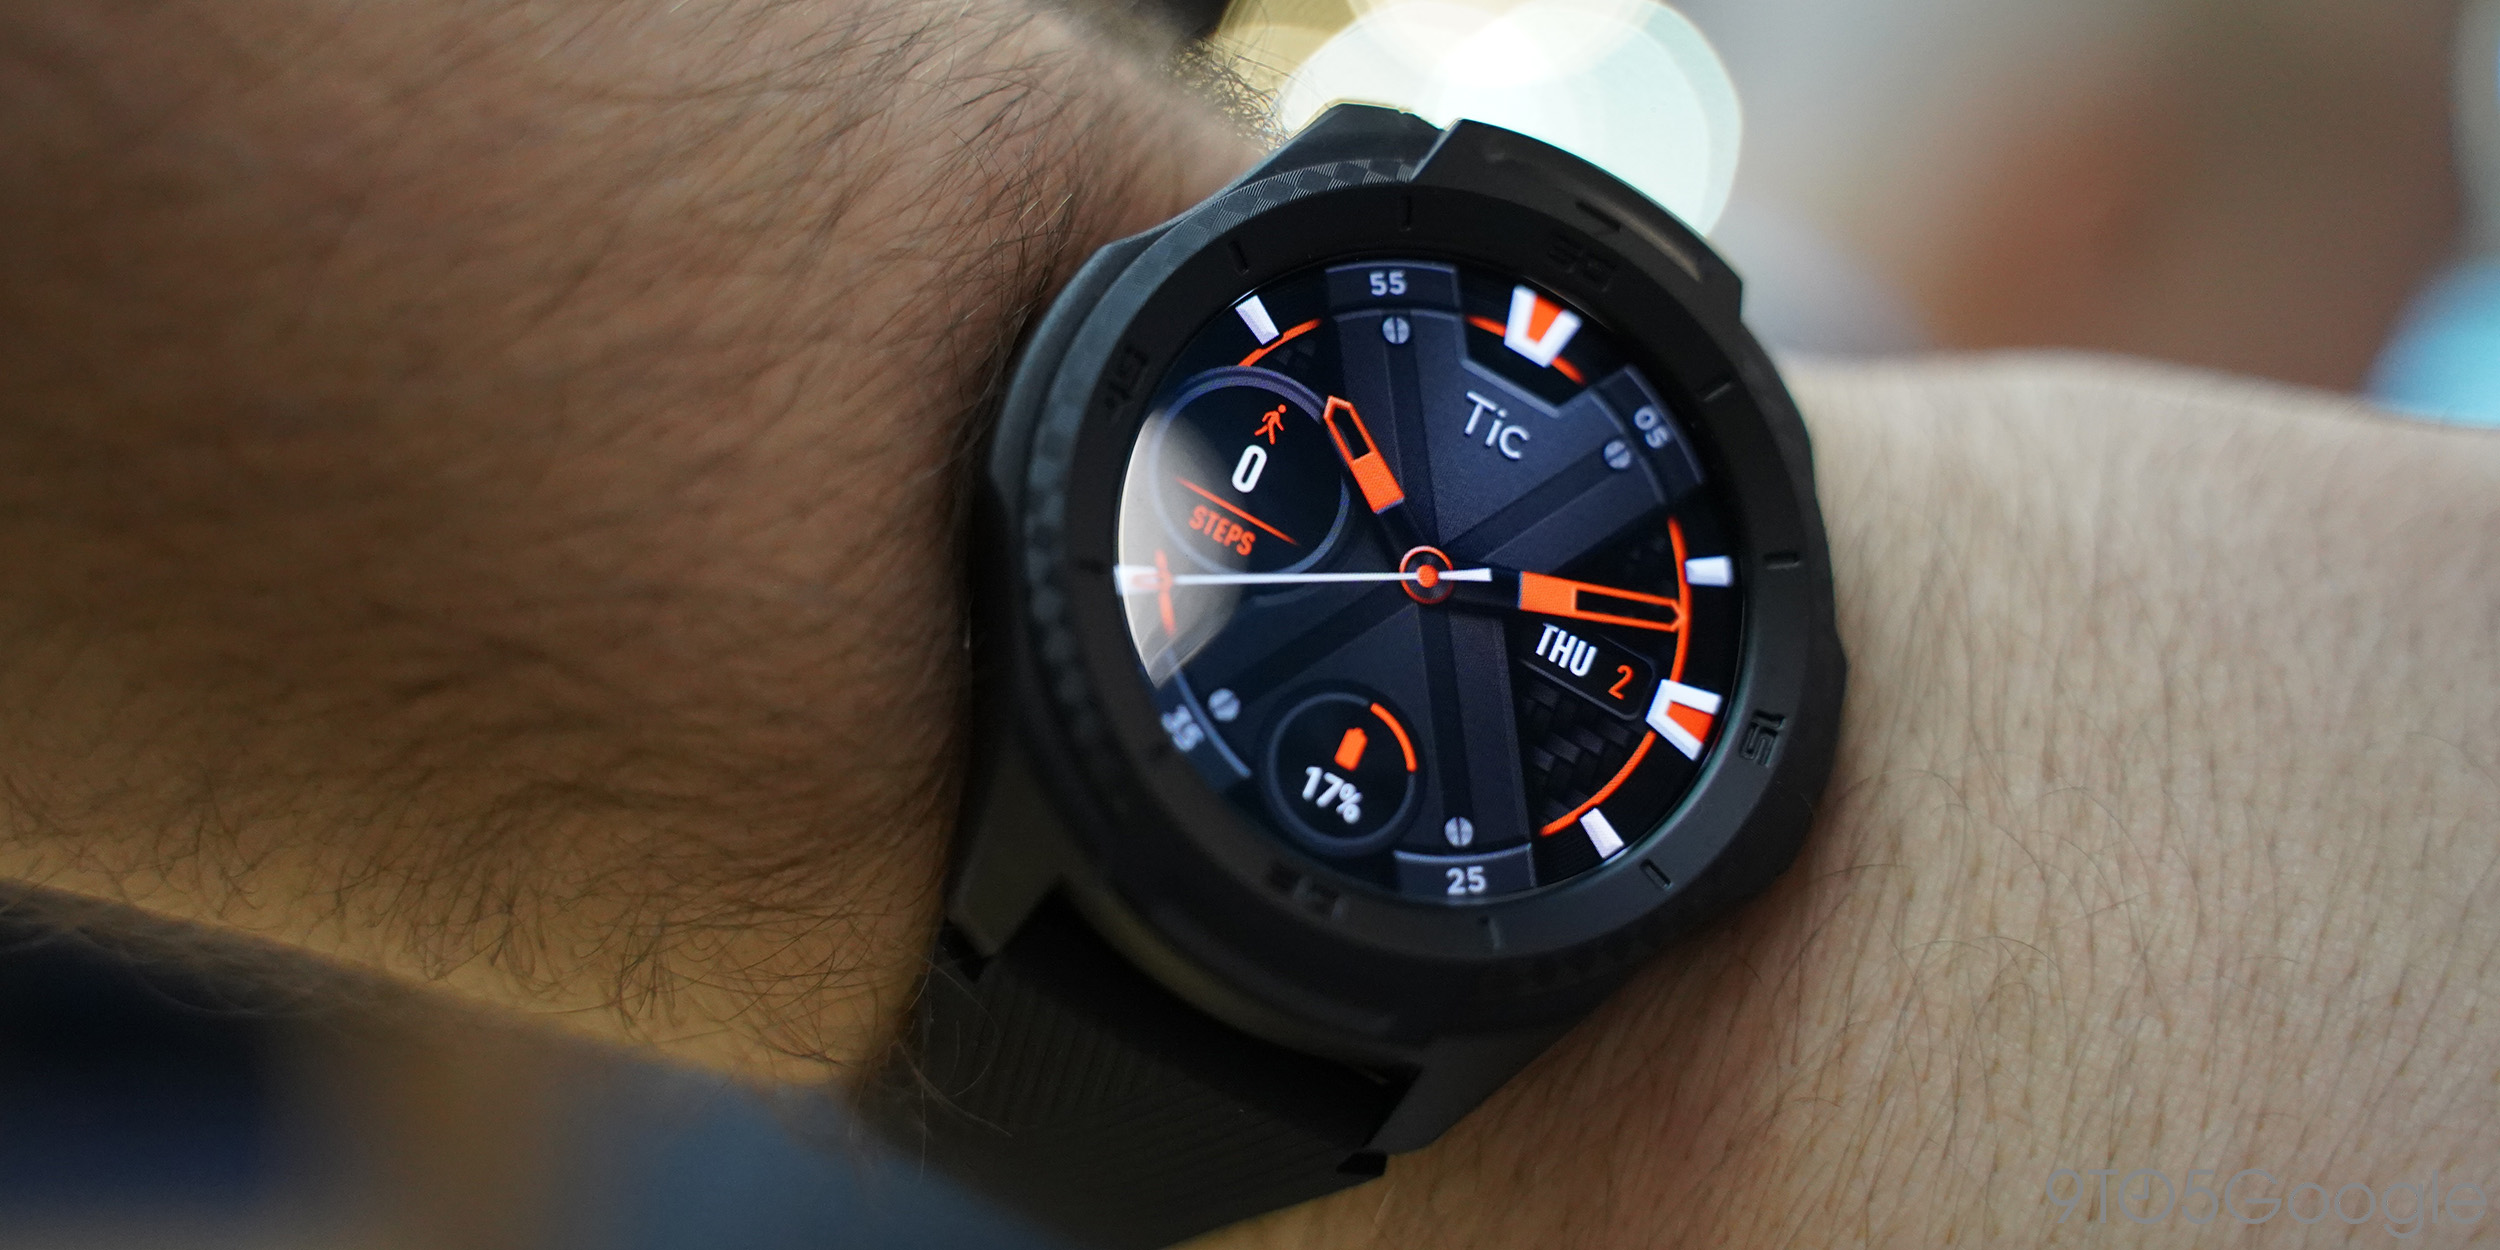 Ticwatch E2 and S2 add new hardware, software features - 9to5Google